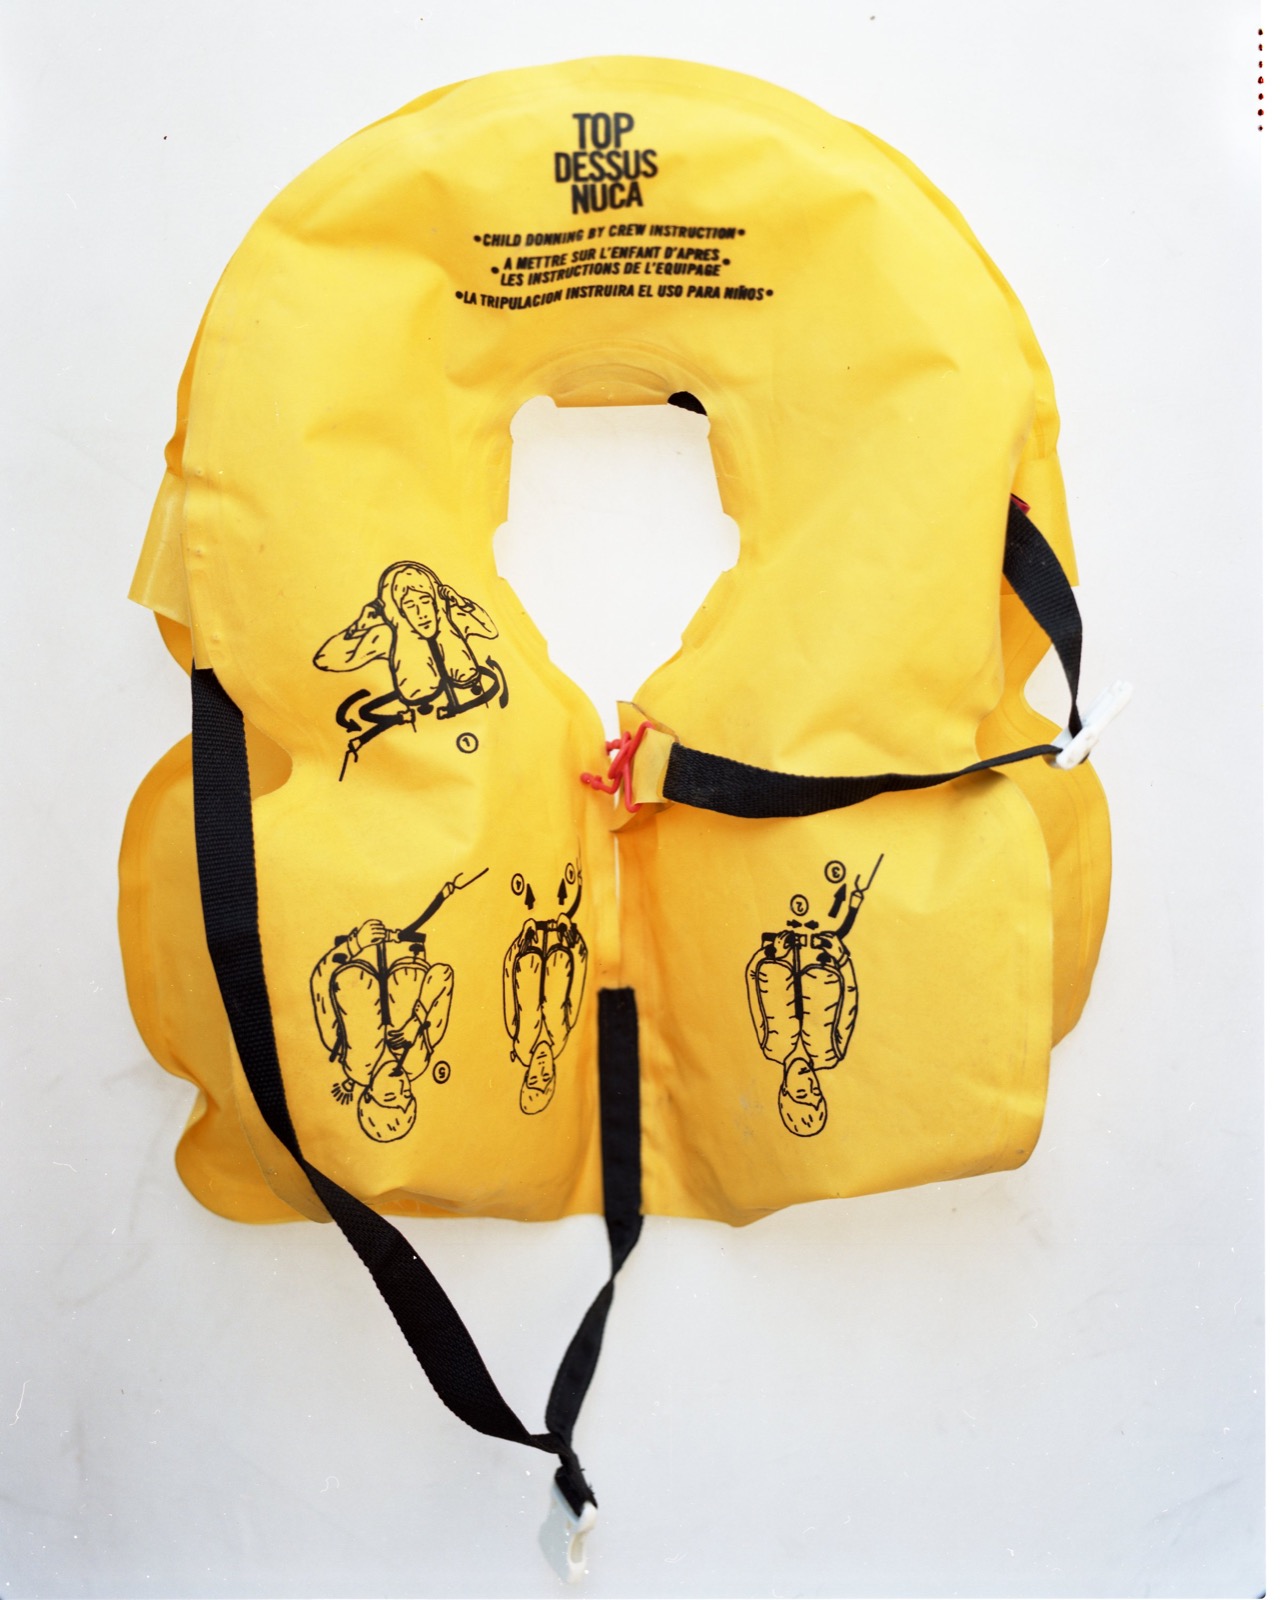  A life vest worn during a crossing of the Aegean Sea from Turkey to Greece, left behind on a beach in Lesbos.   